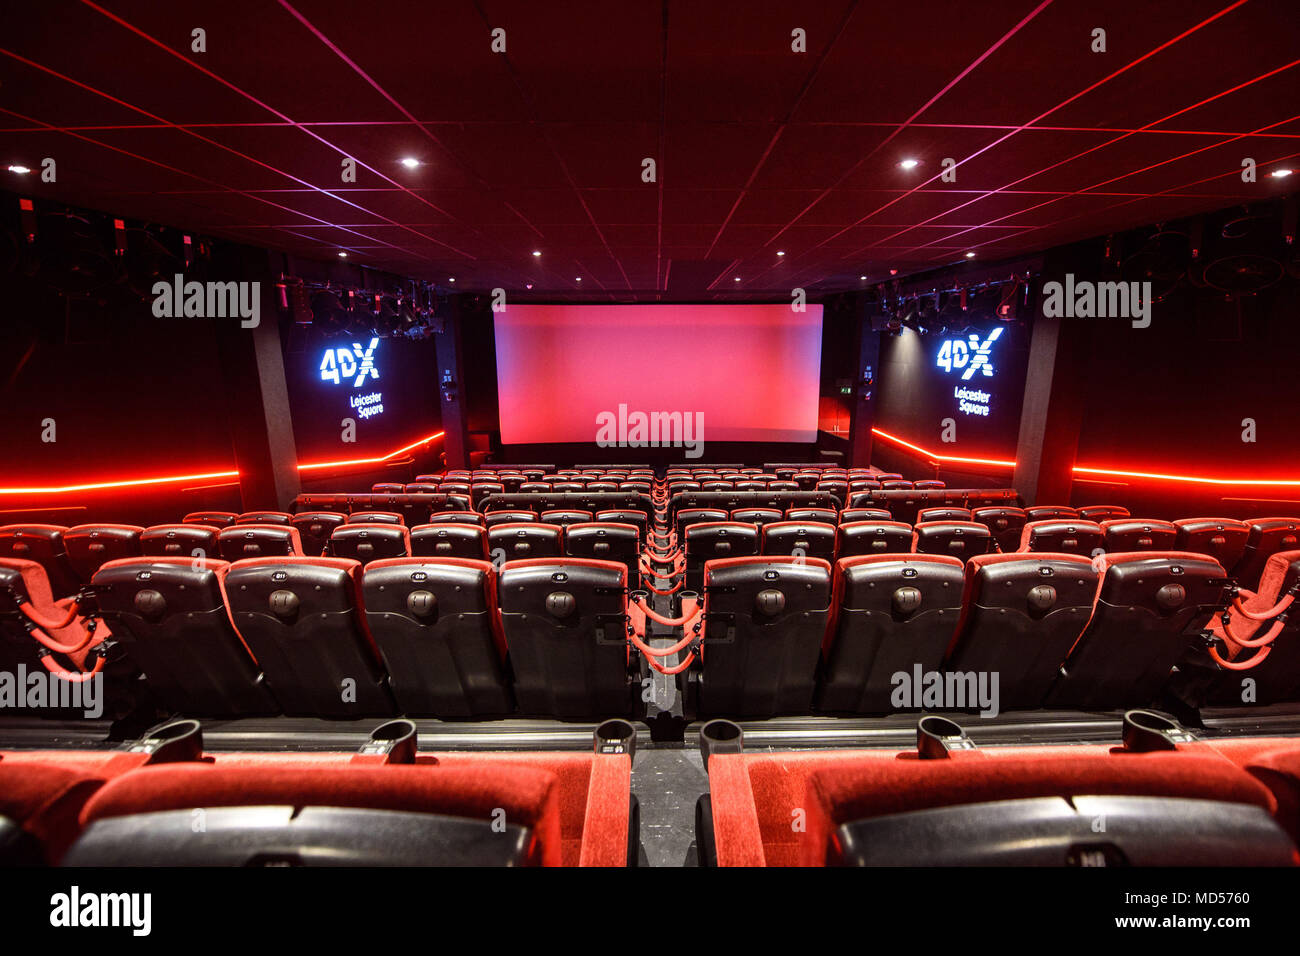 General view of the refurbishment of the Cineworld Leicester Square cinema in London. The new-look cinema includes a 4DX screen, which features moving seats, rain, snow, fog and scents to to enchance moviegoers' experience. Stock Photo